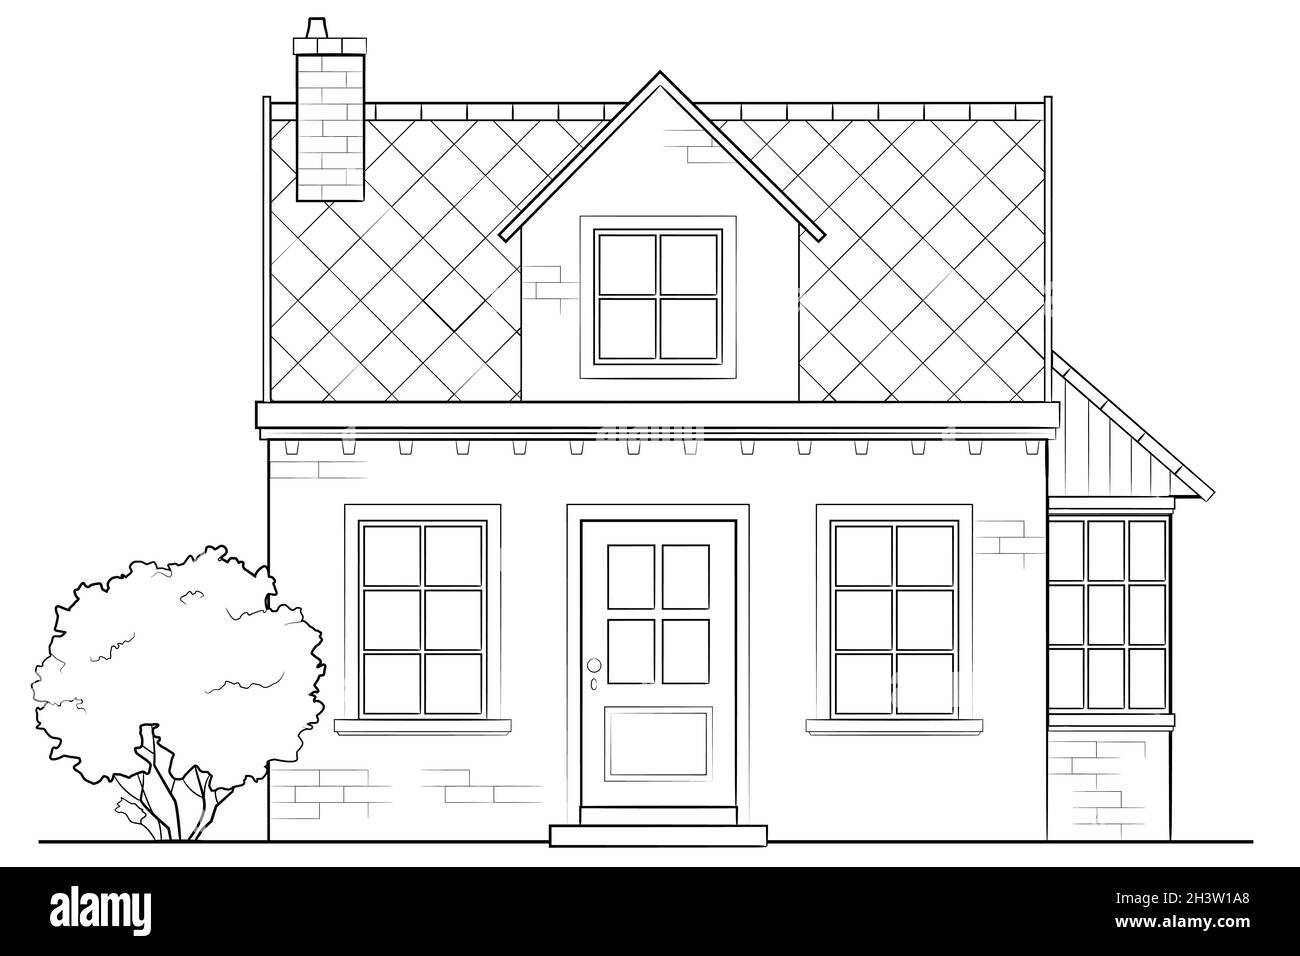 Drawing of classic family house - black and white illustration Stock Vector